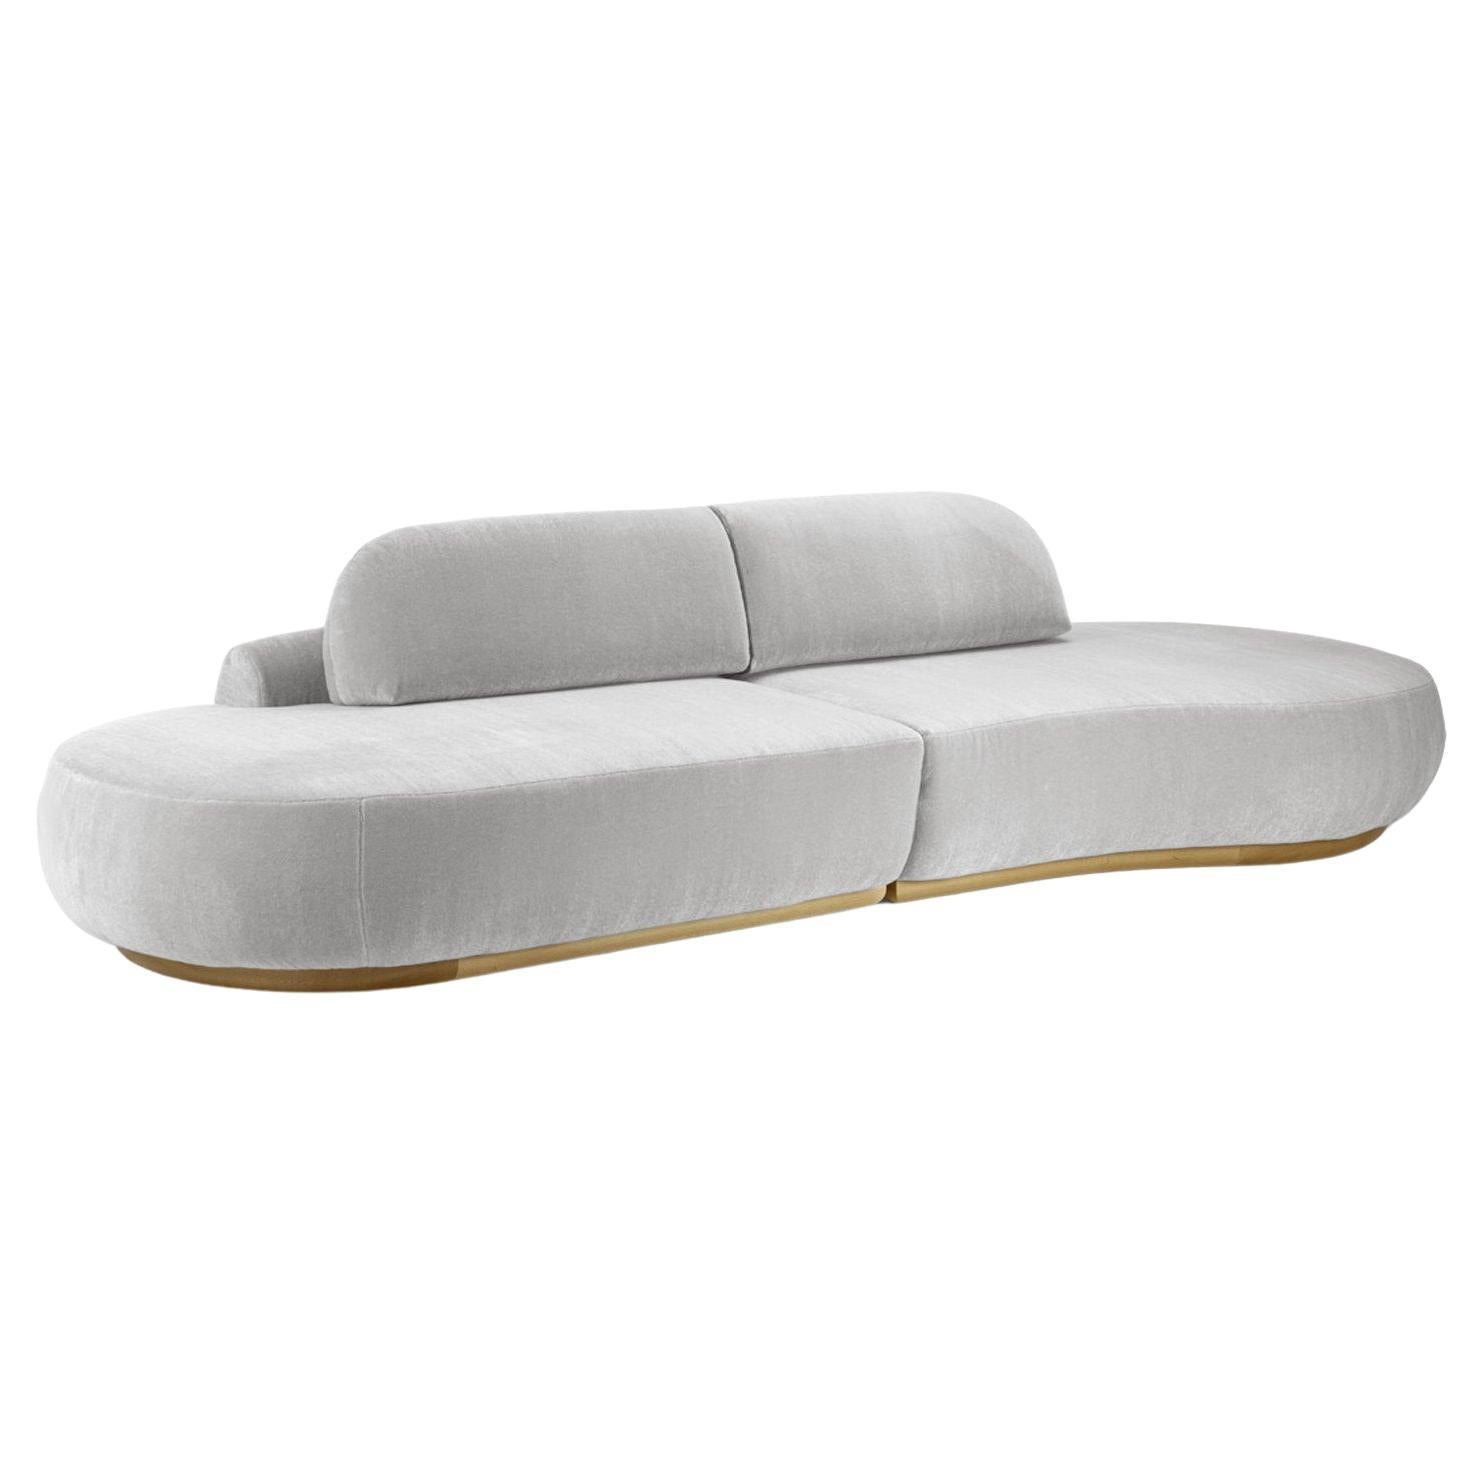 Naked Curved Sectional Sofa, 2 Piece with Natural Oak and Aluminium For Sale